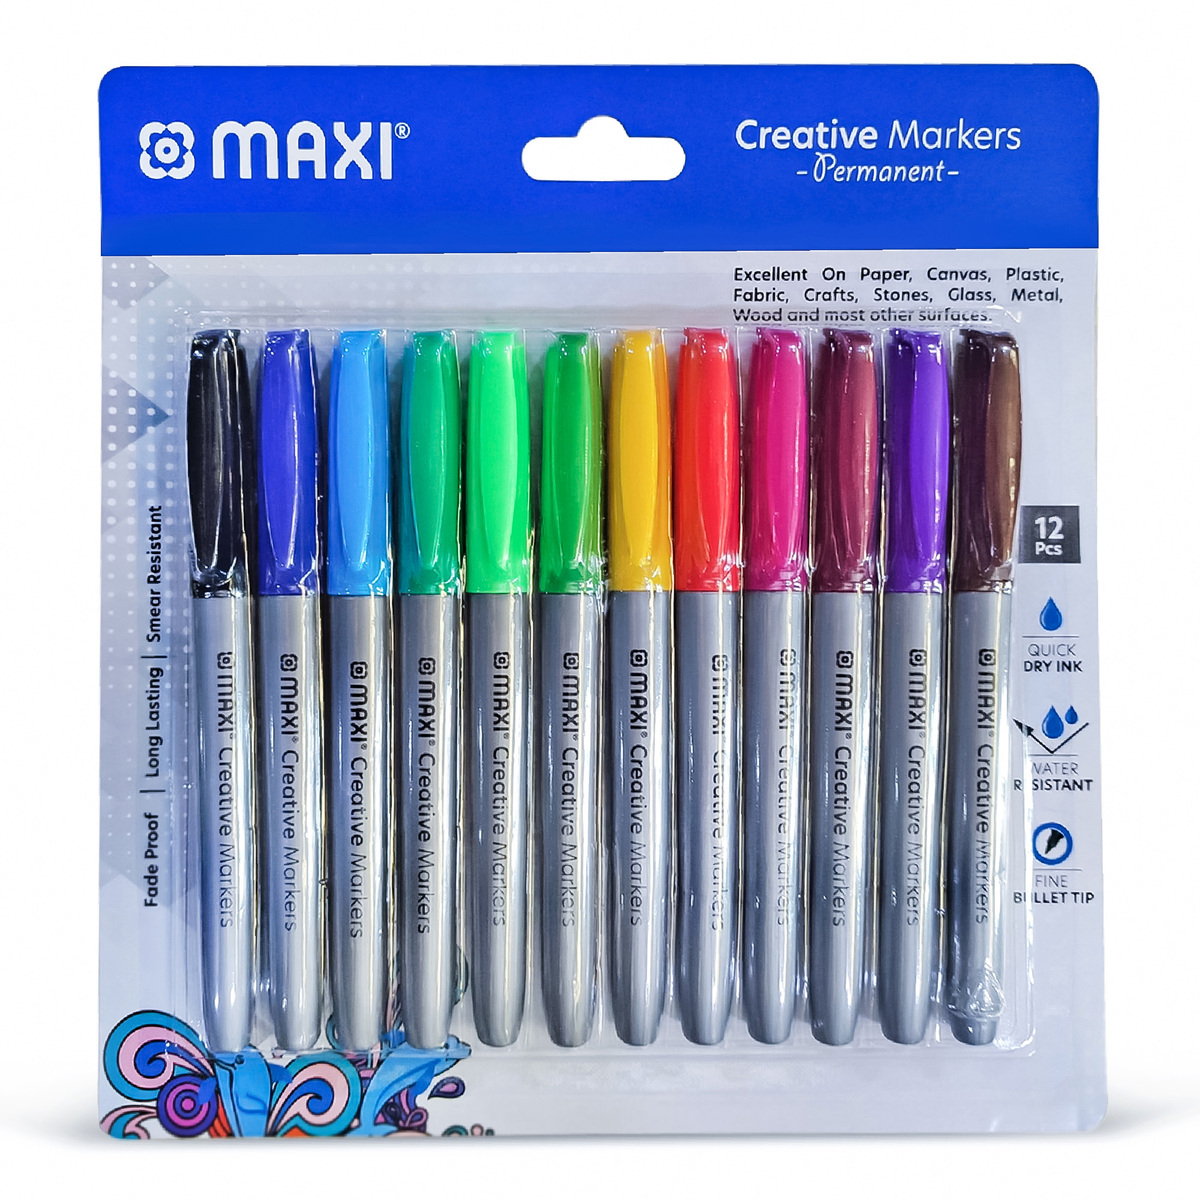 Maxi Creative Permanent Marker With Bullet Slim Blister, Pacl of 12, Assorted colours, MX-40-12A